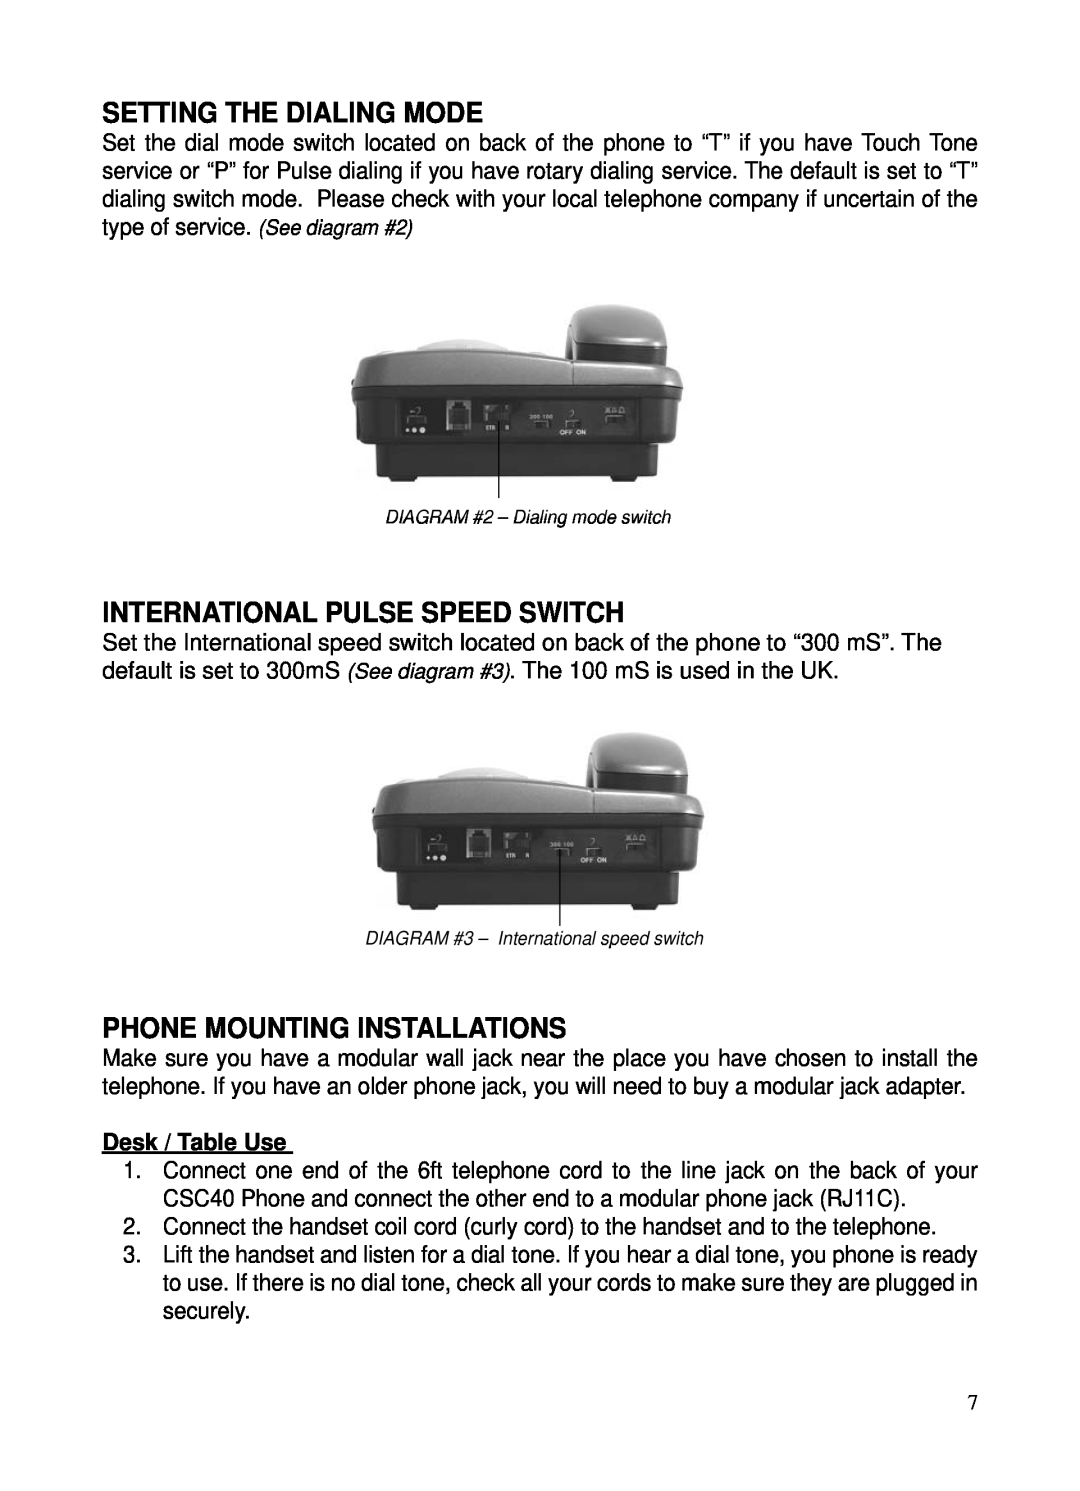 ClearSounds CSC40 user manual Setting The Dialing Mode, International Pulse Speed Switch, Phone Mounting Installations 